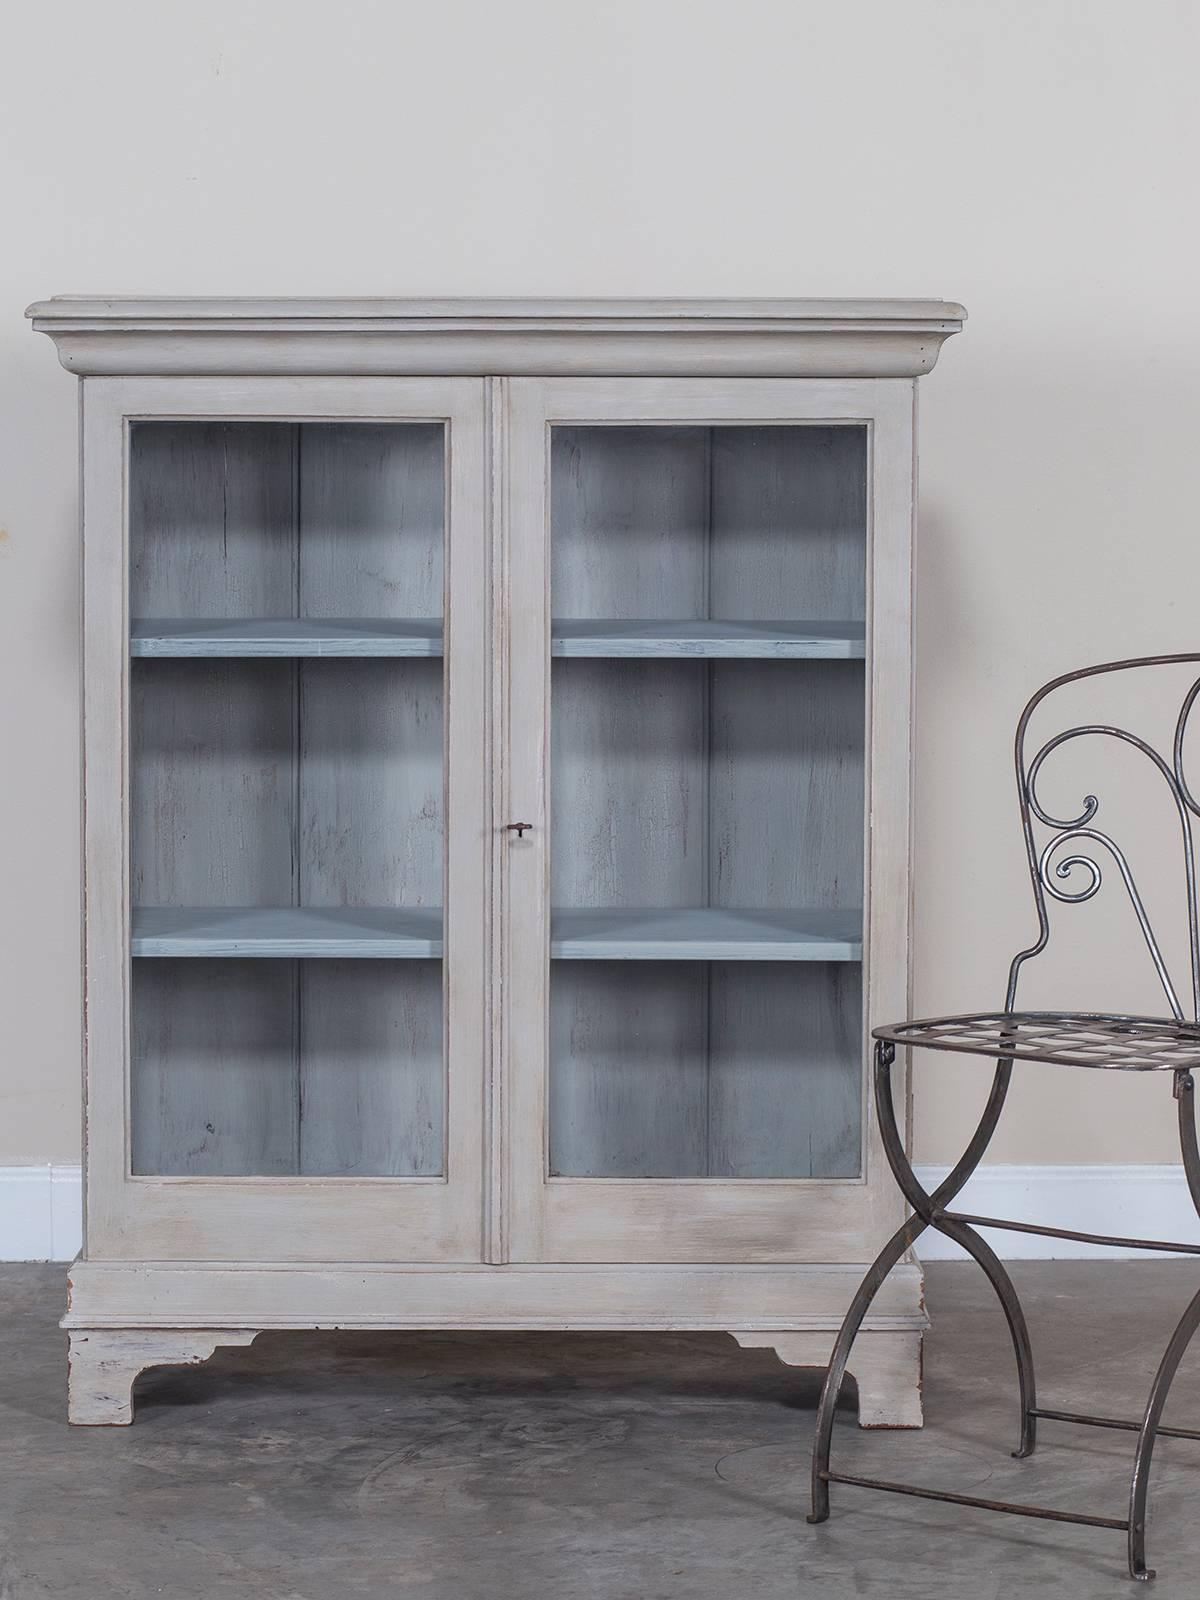 Receive our new selections direct from 1stdibs by email each week. Please click follow dealer below and see them first!

The simplicity of this antique English display cabinet bookcase, circa 1875 lends itself to focusing attention on what is